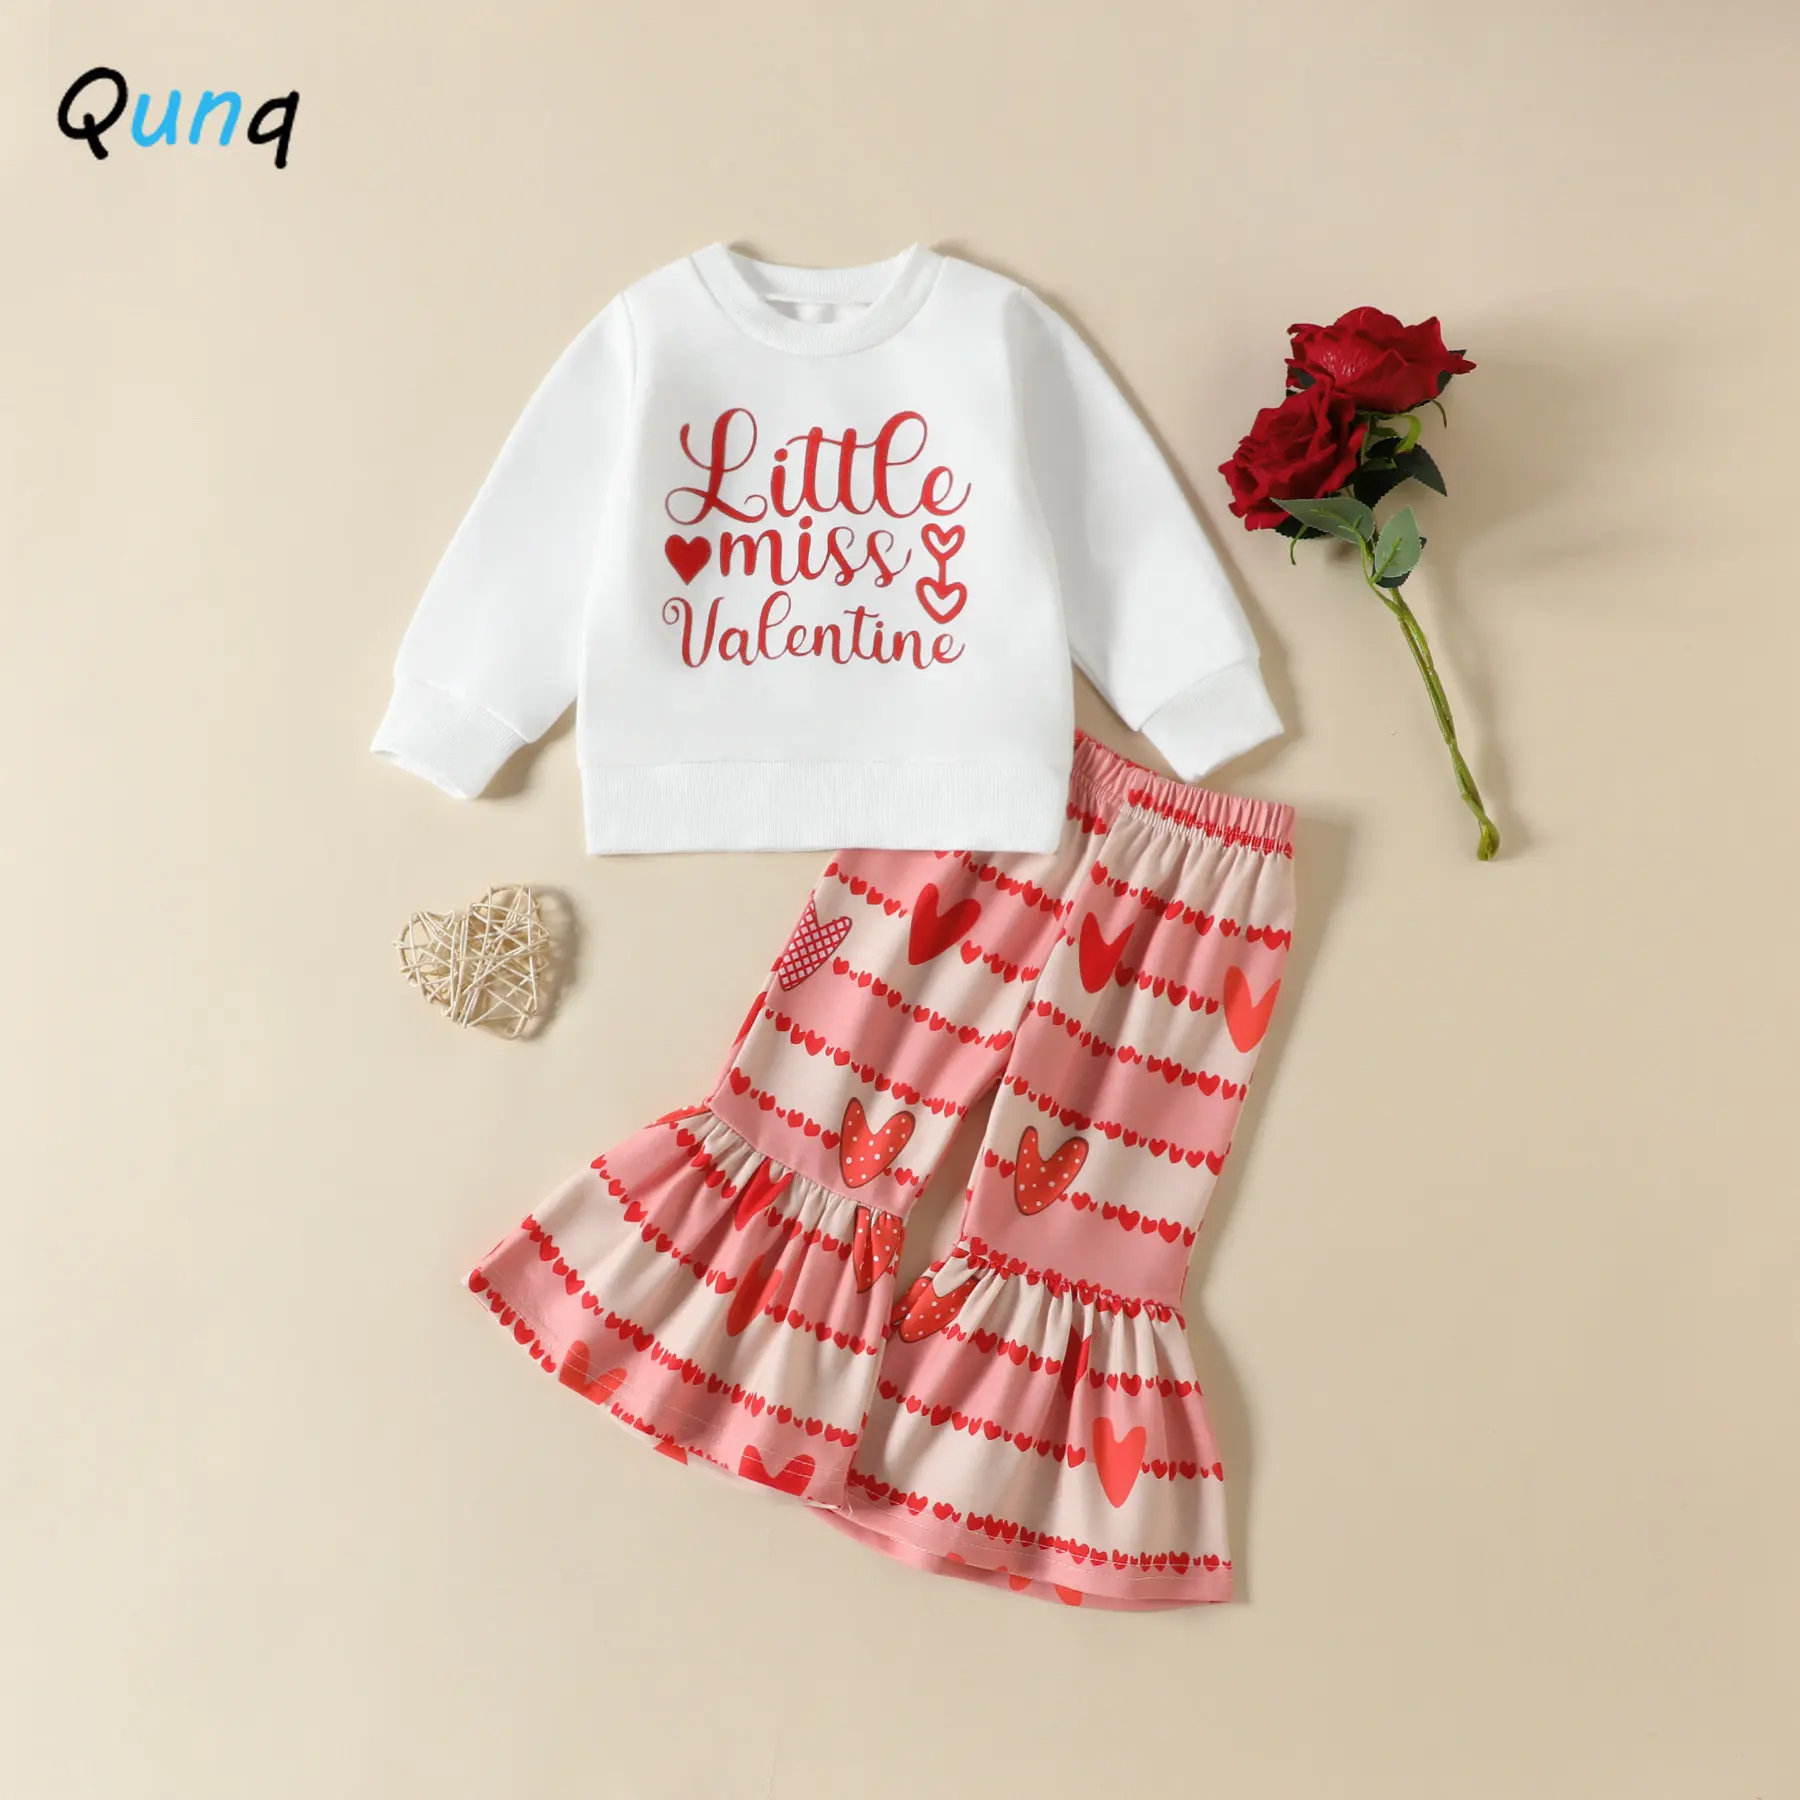 

Qunq Autumn Girls Long Sleeve O Neck Print Top + Striped Love Heart Flared Trousers 2 Pieces Set Casual Kids Clouthes Age 3T-8T